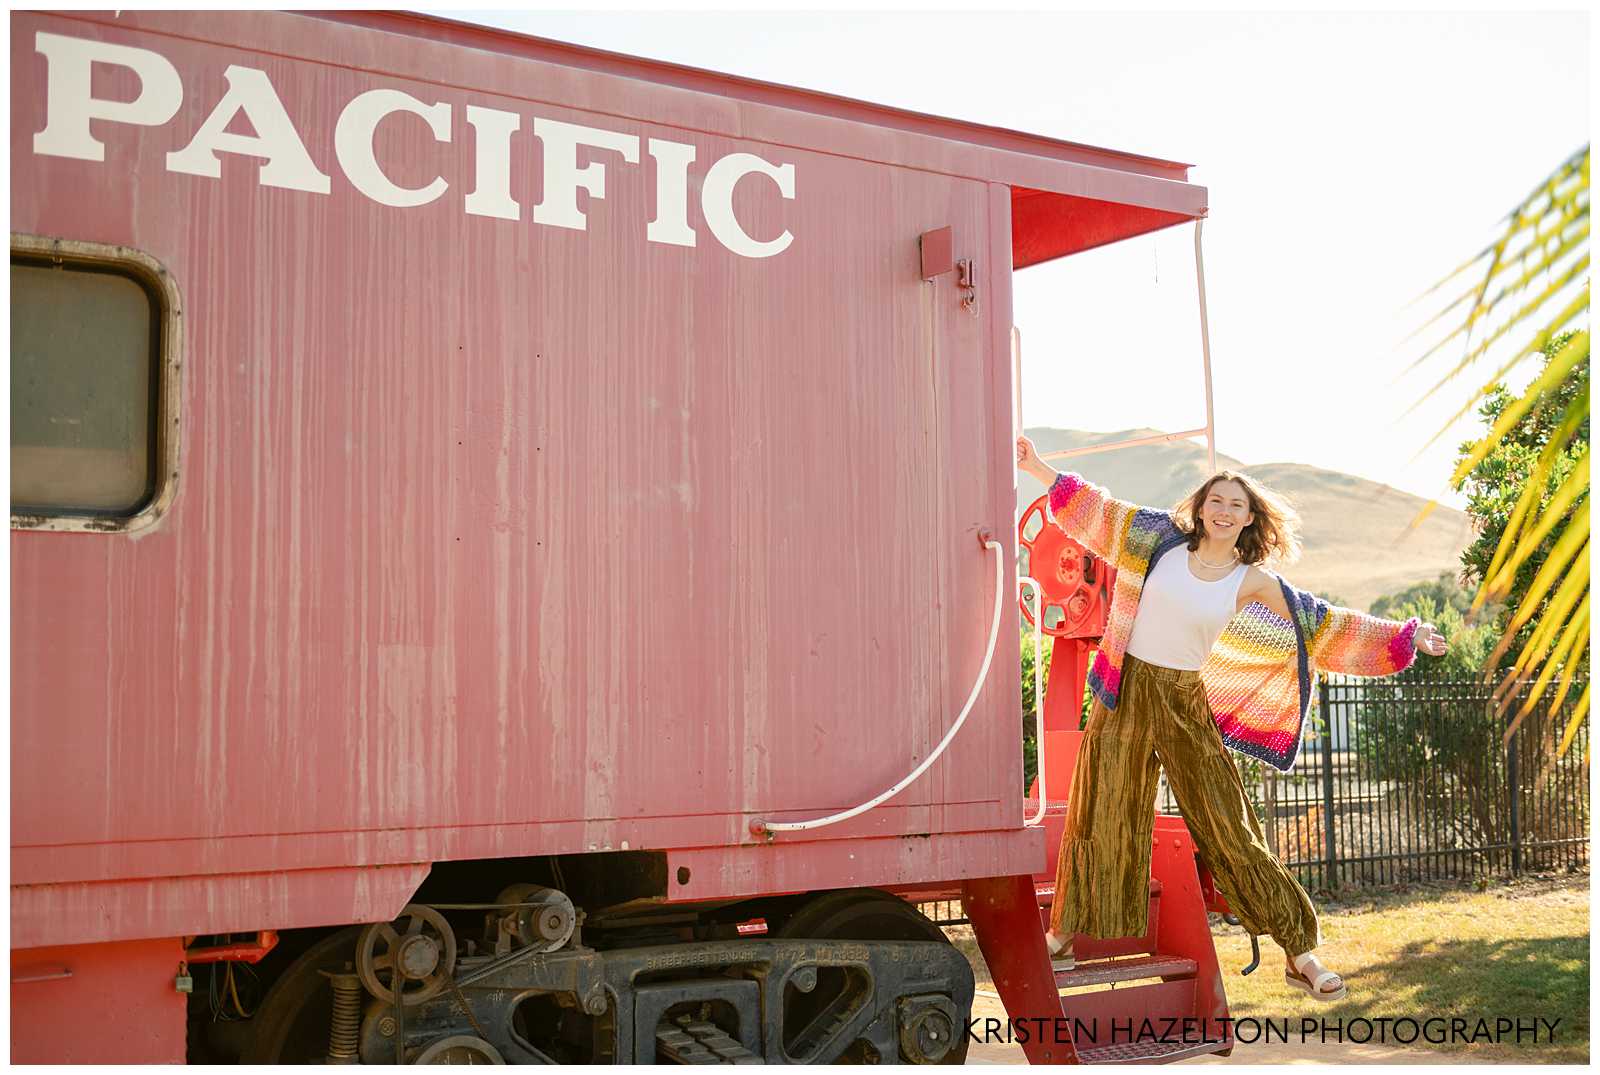 High school senior girl swinging on the back of a train caboose that reads "Pacific" at Niles in Fremont, CA